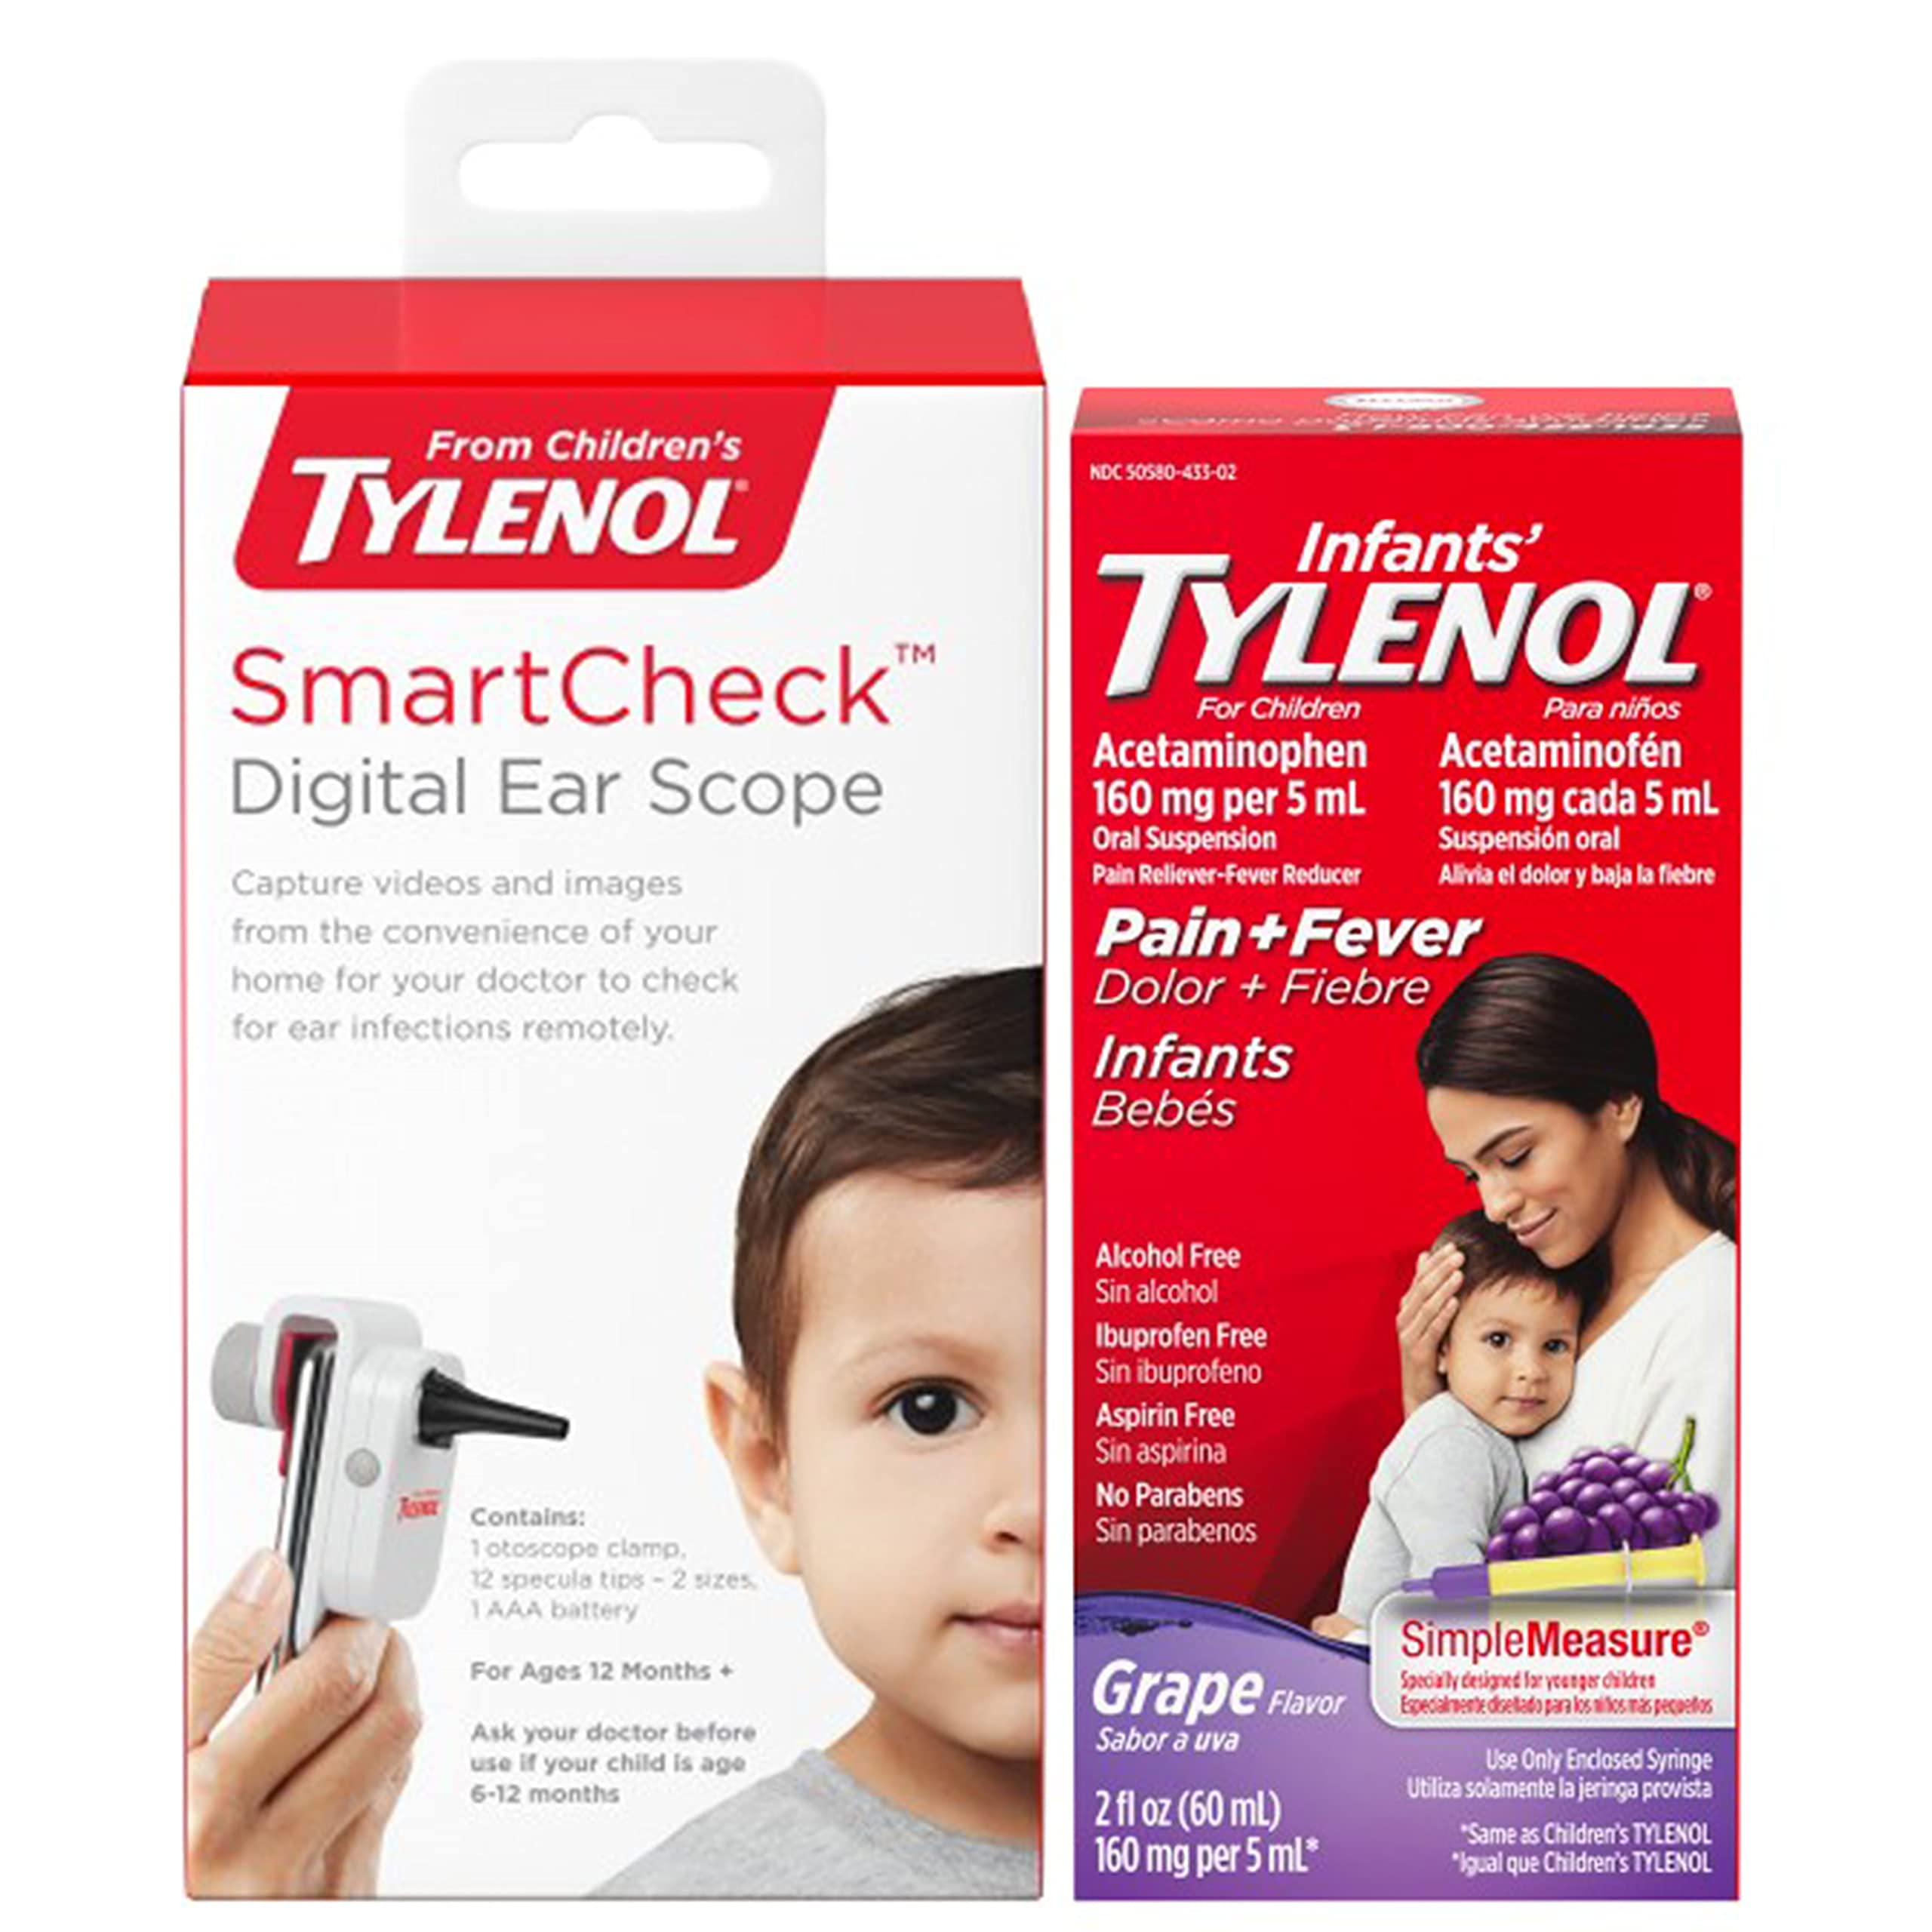 SmartCheck from Children's Tylenol Digital Ear Scope Otoscope with Light for iPhone, 1 Clamp & 12 Tips & Infants' Tylenol Oral Suspension Liquid Medicine with Acetaminophen for Pain Relief, 2 fl. oz